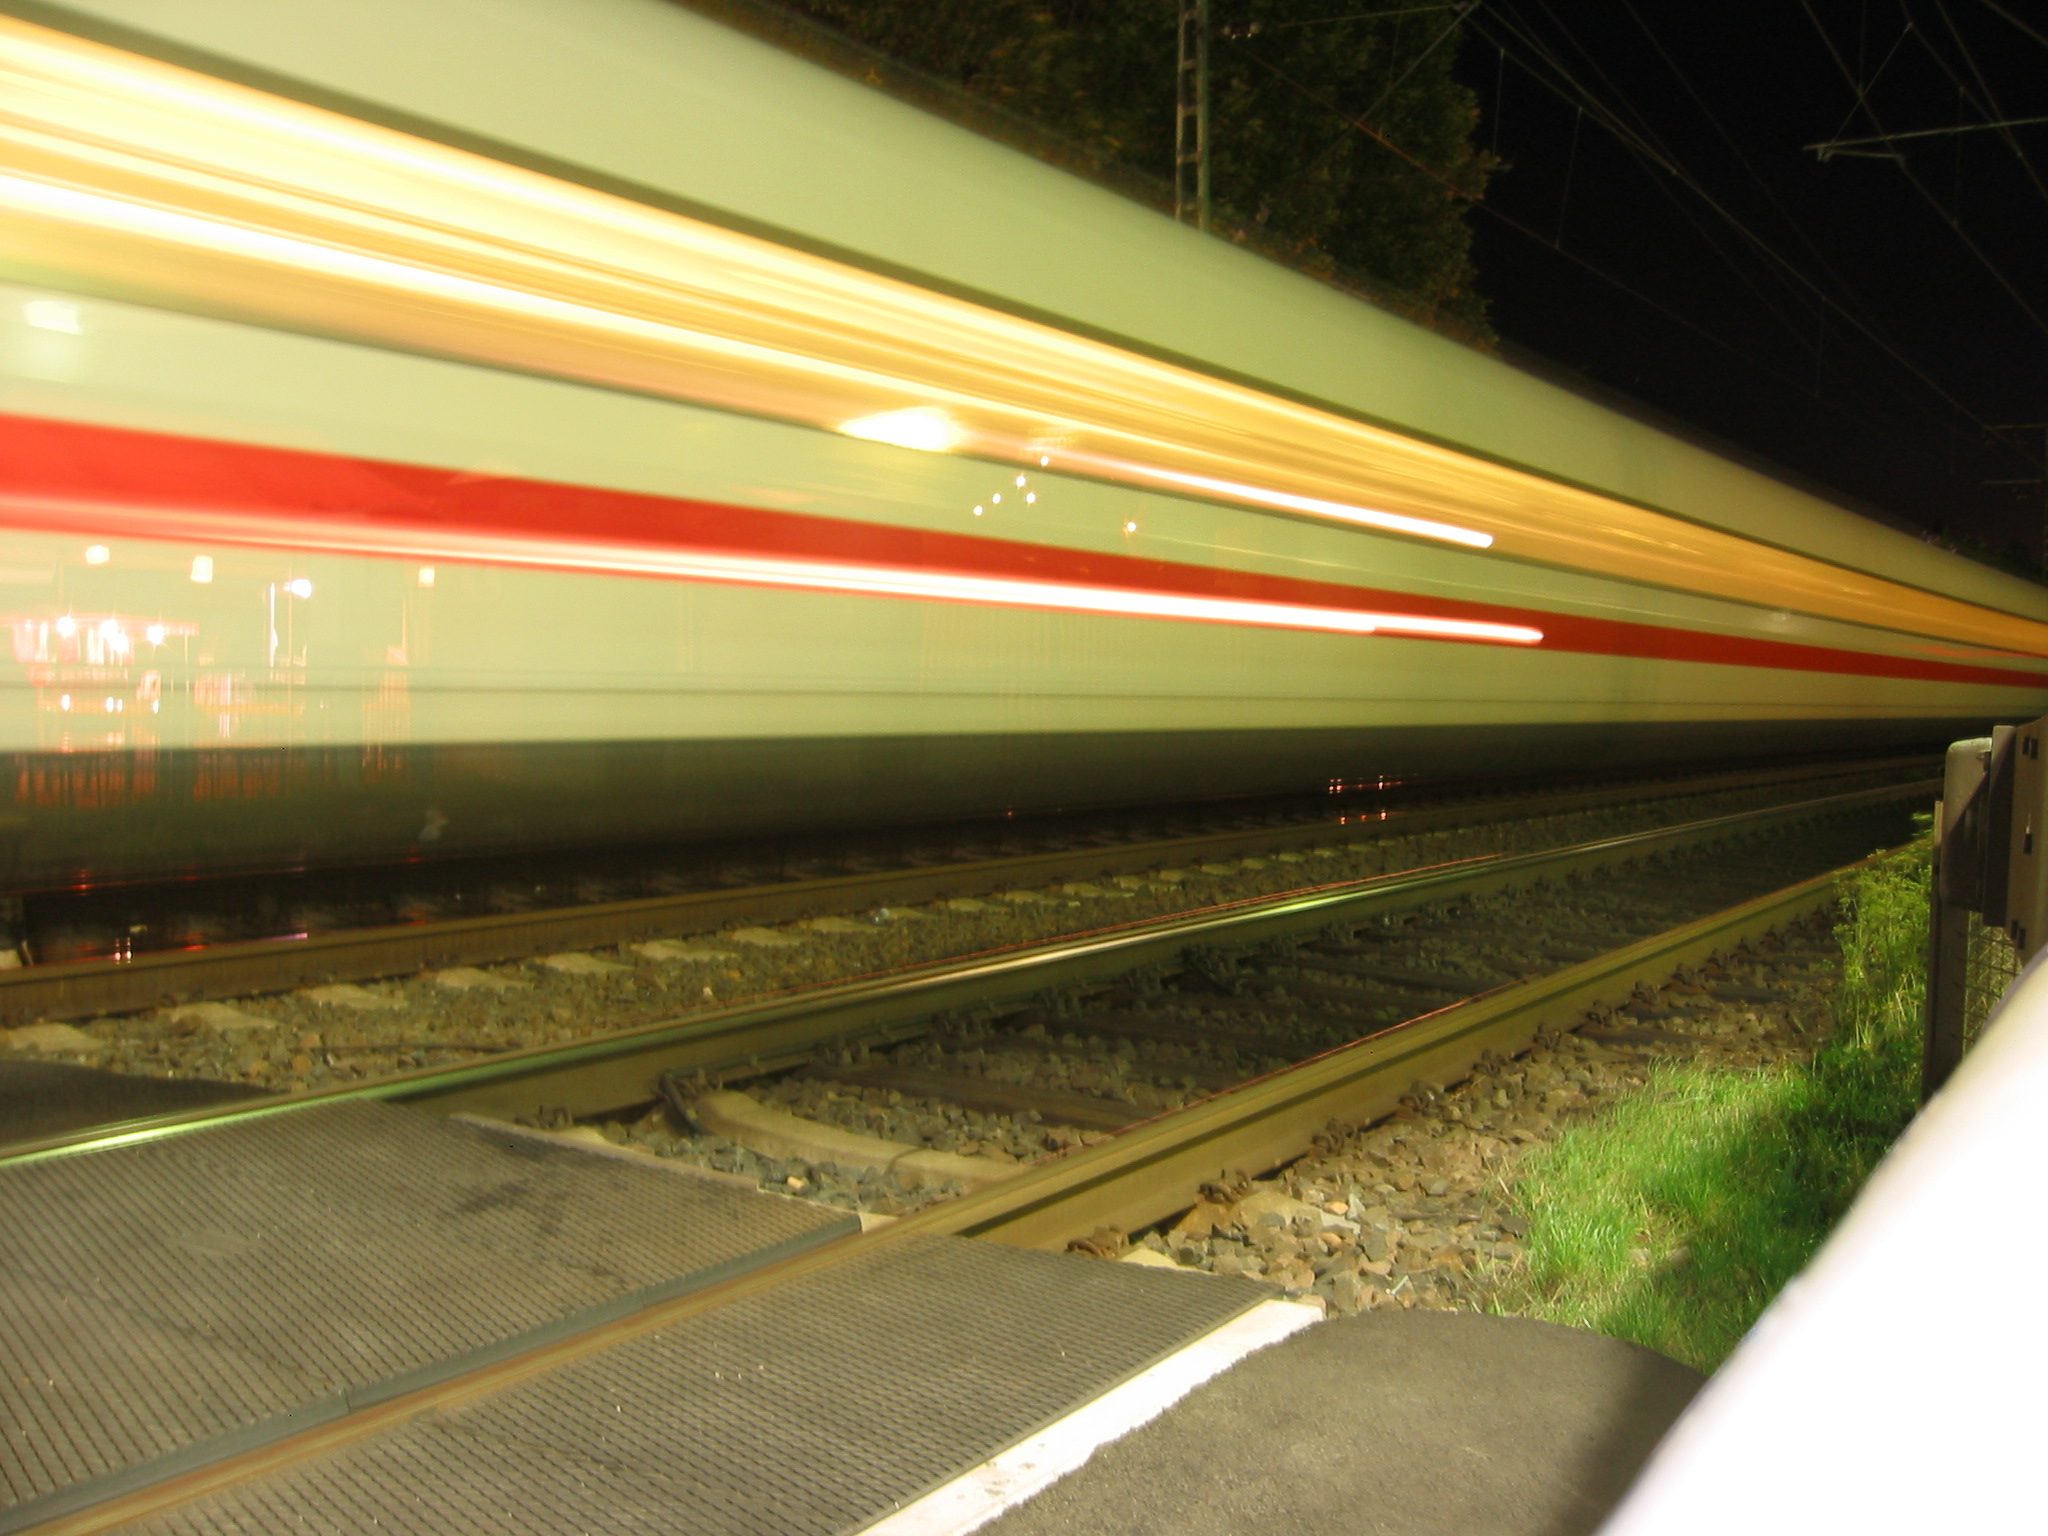 A train rushes by